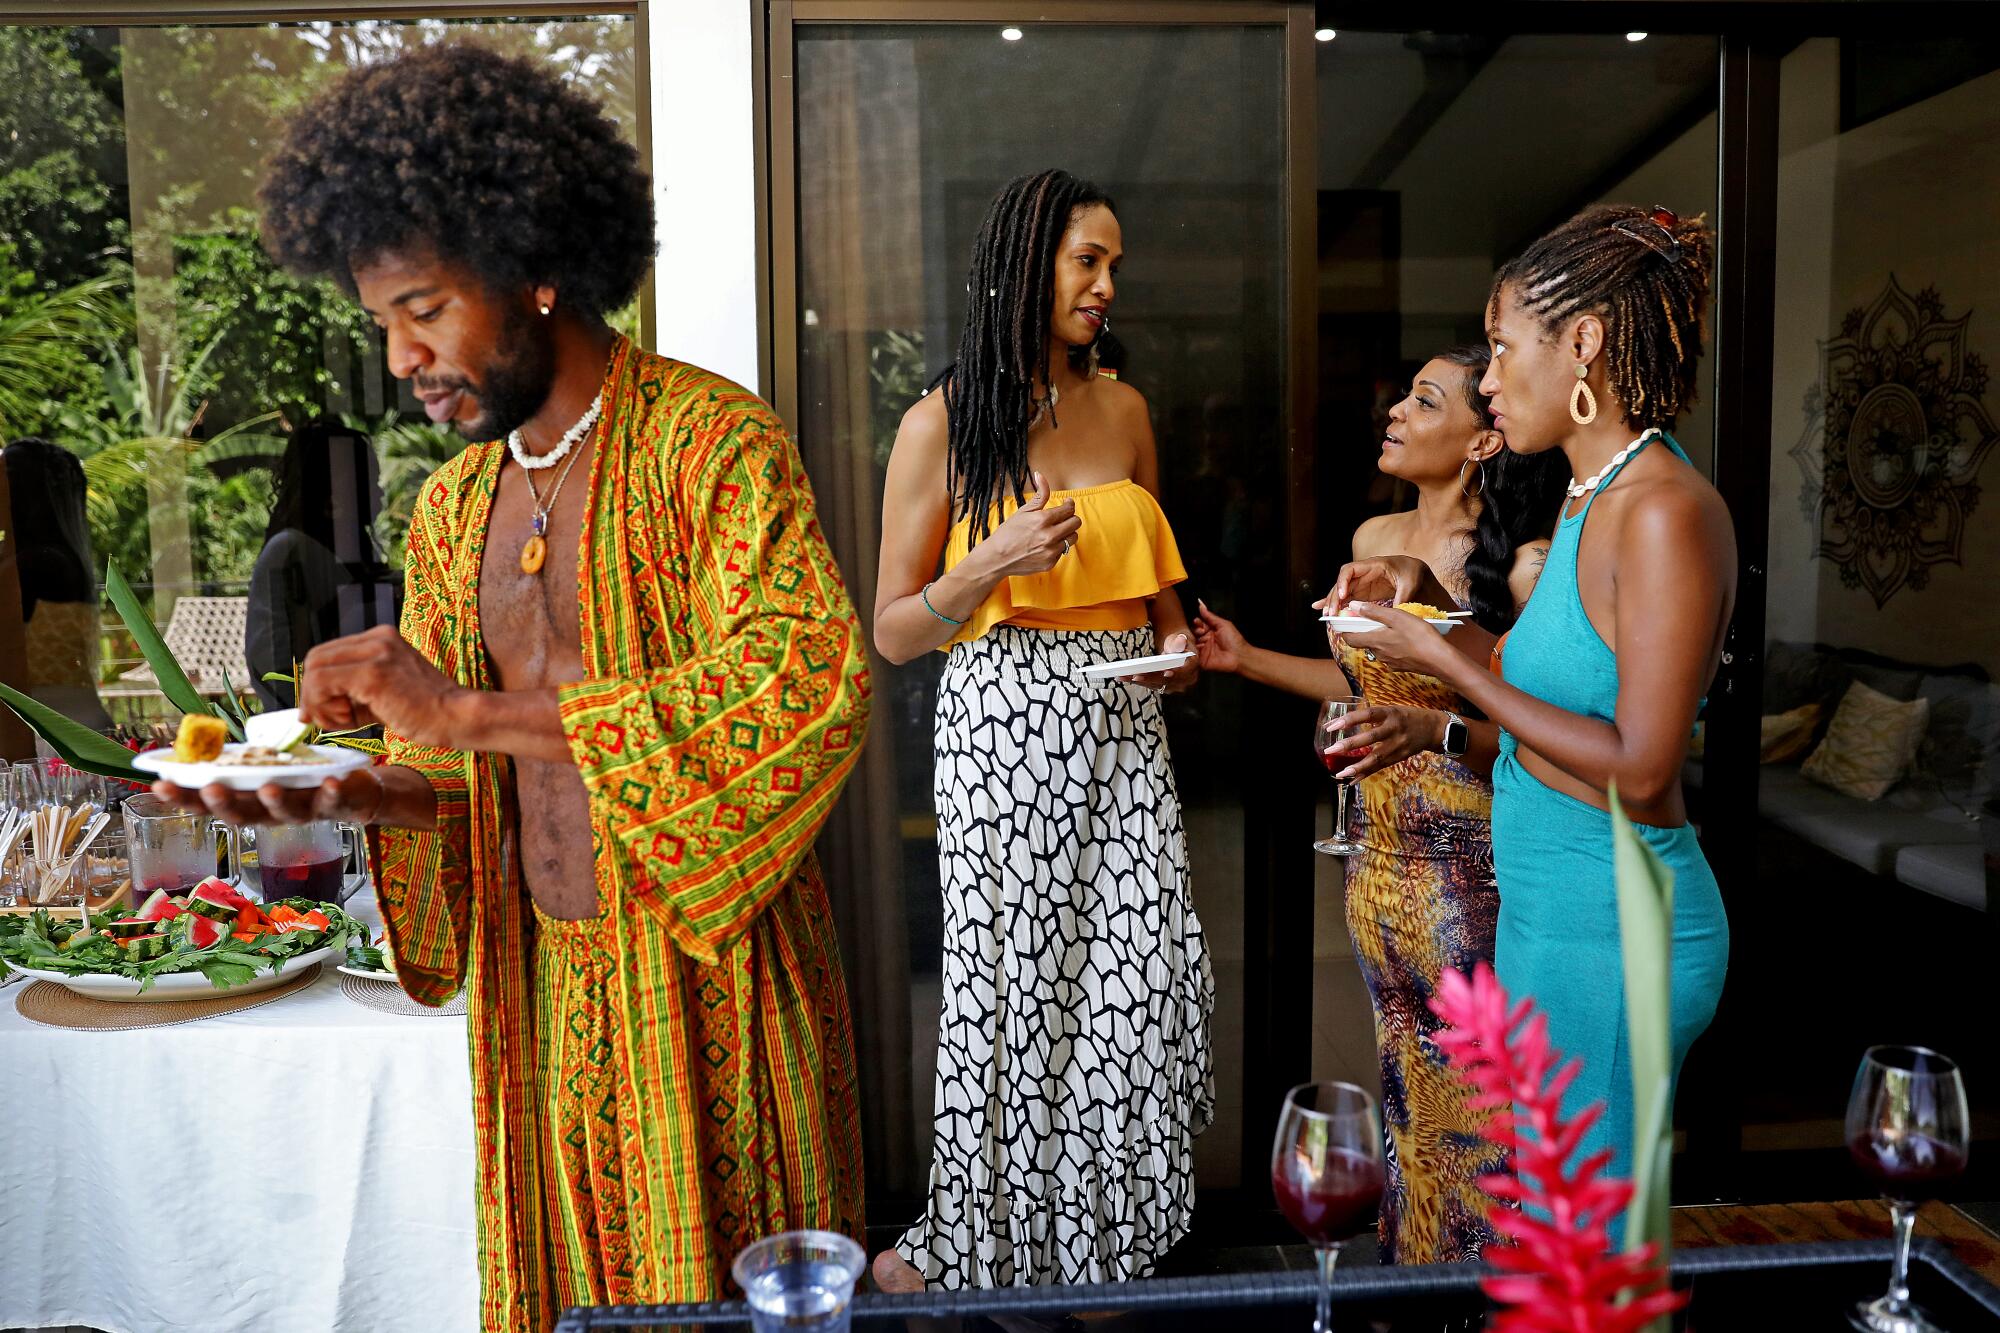 Black people gather on a patio.